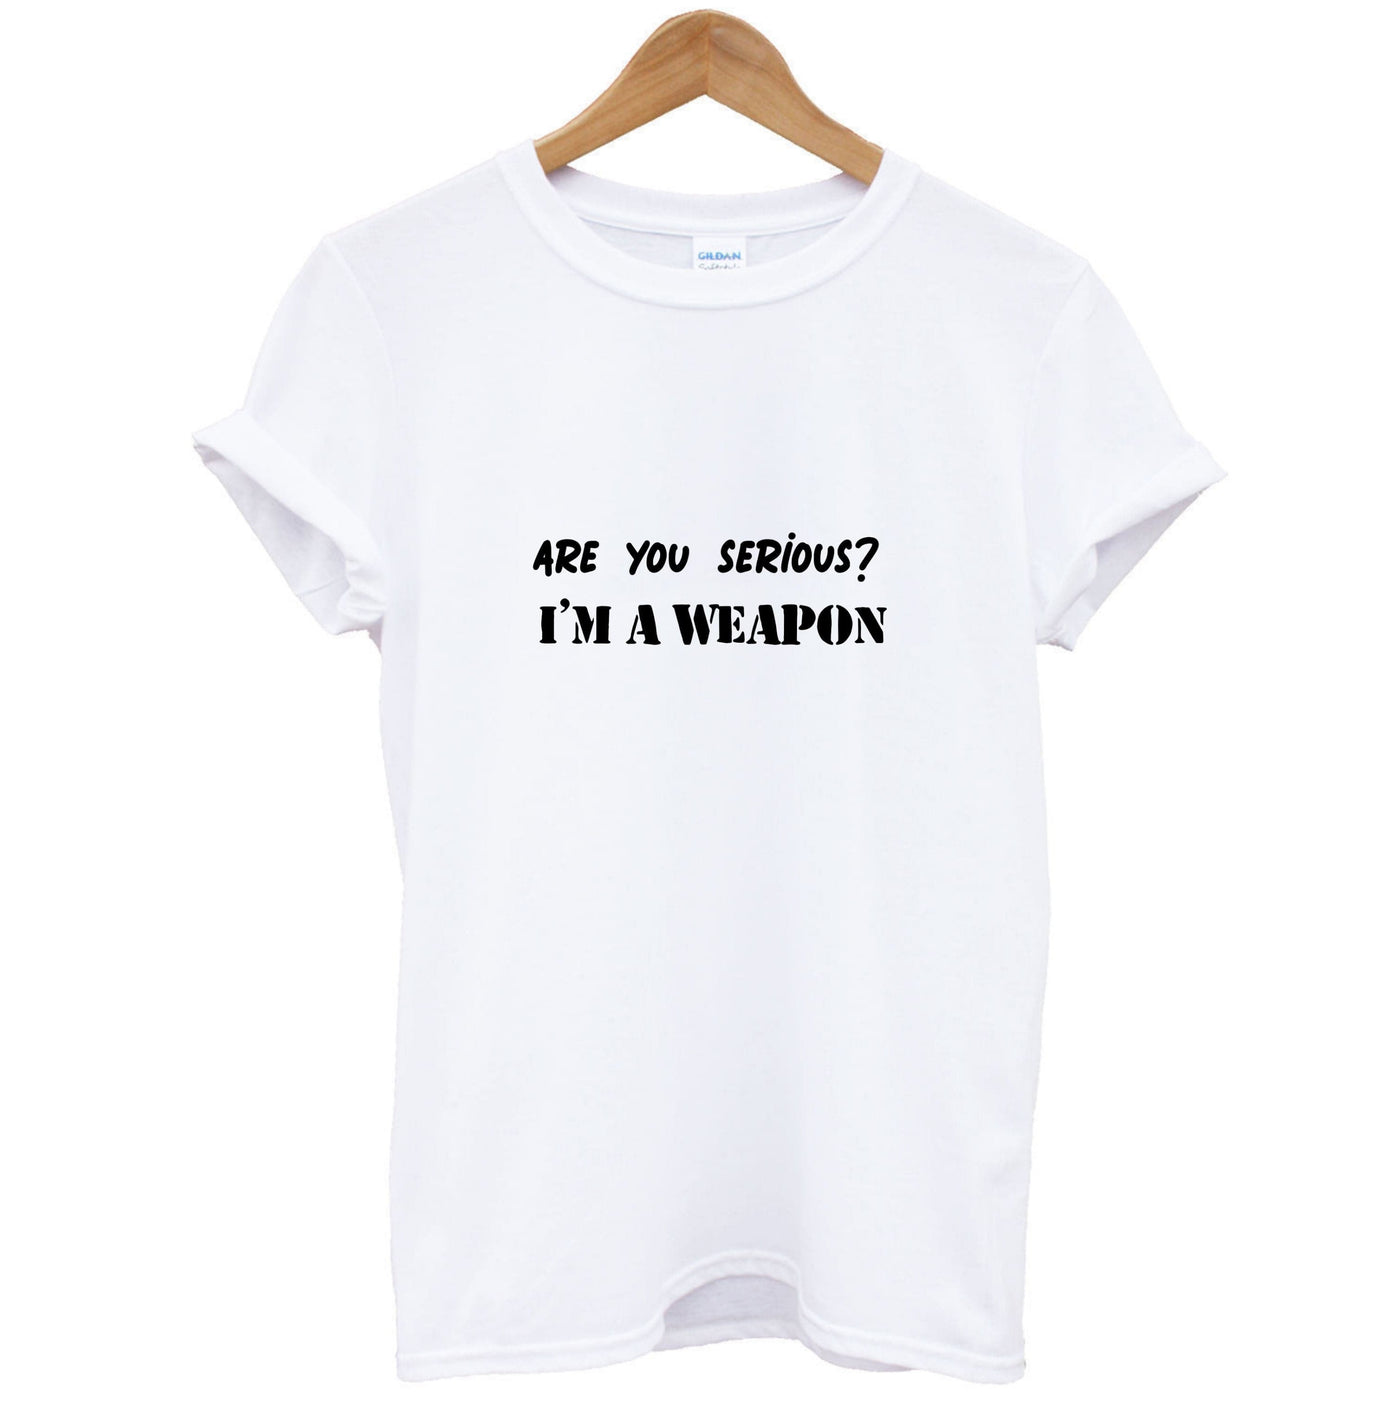 Are You Serious? I'm A Weapon - Islanders T-Shirt